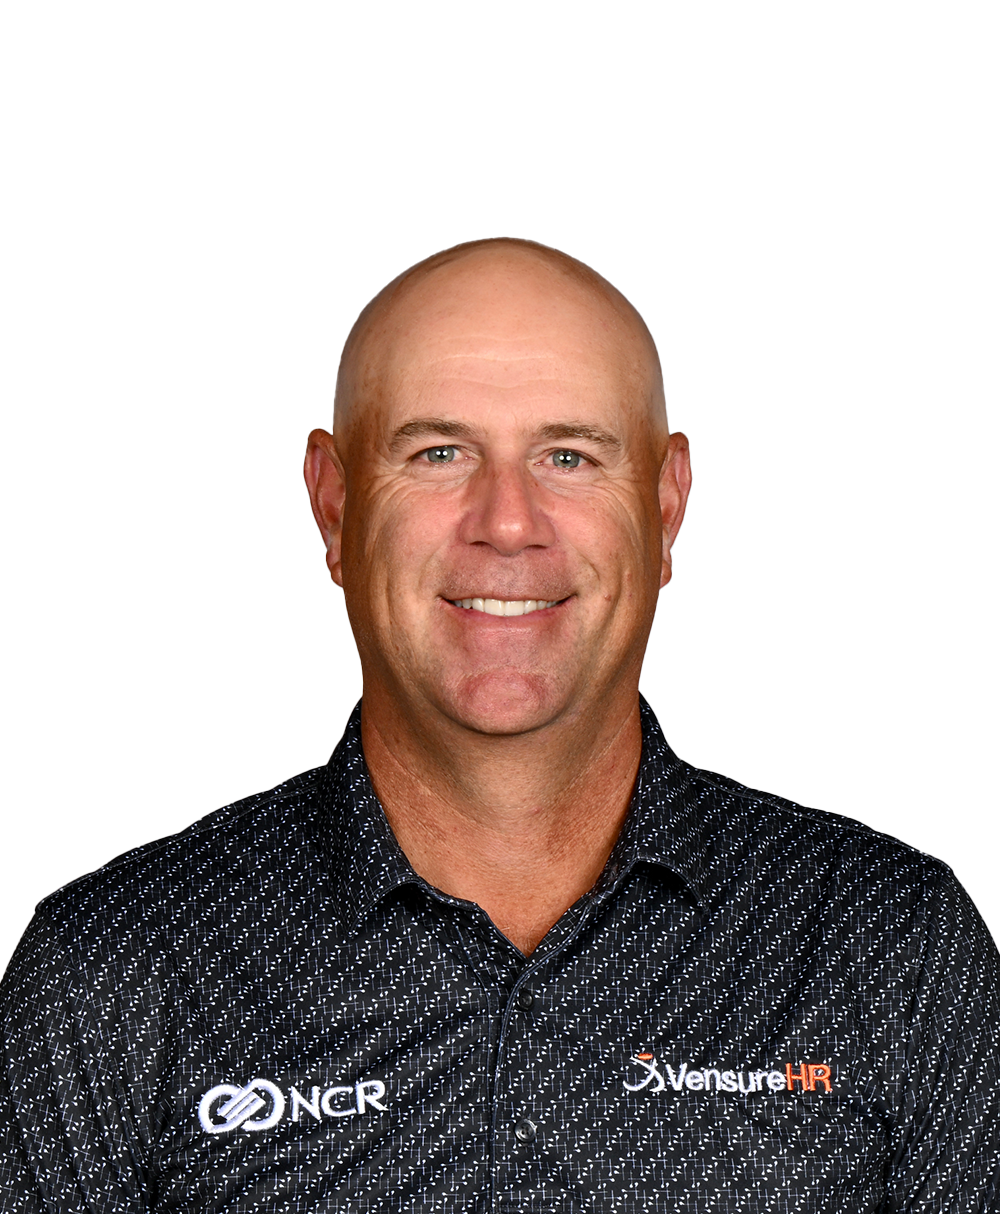 Stewart Cink dons a brand-new Suns Kevin Durant jersey at the